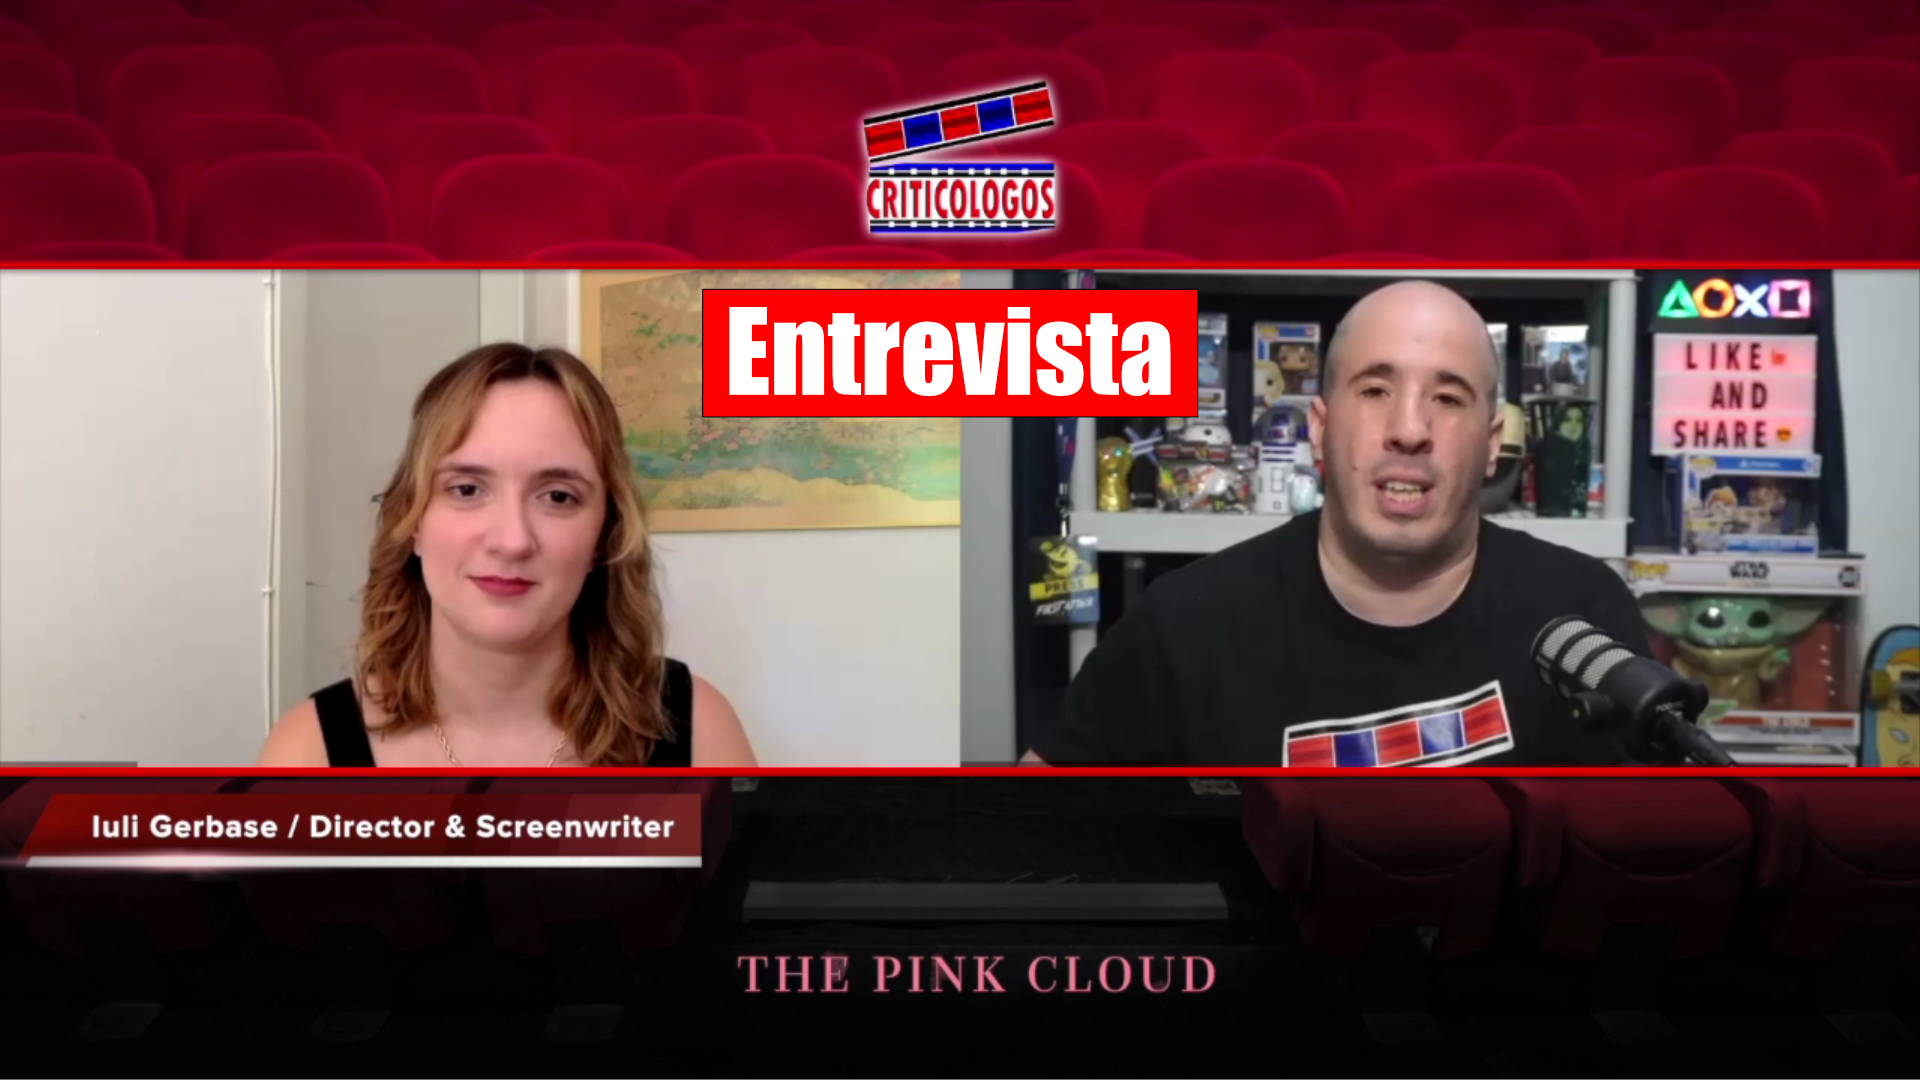 Interview by @Rmediavilla w/ #LuliGerbase, director & screenwriter of the Sci-Fi movie, “The Pink Cloud”. #ThePinkCloud